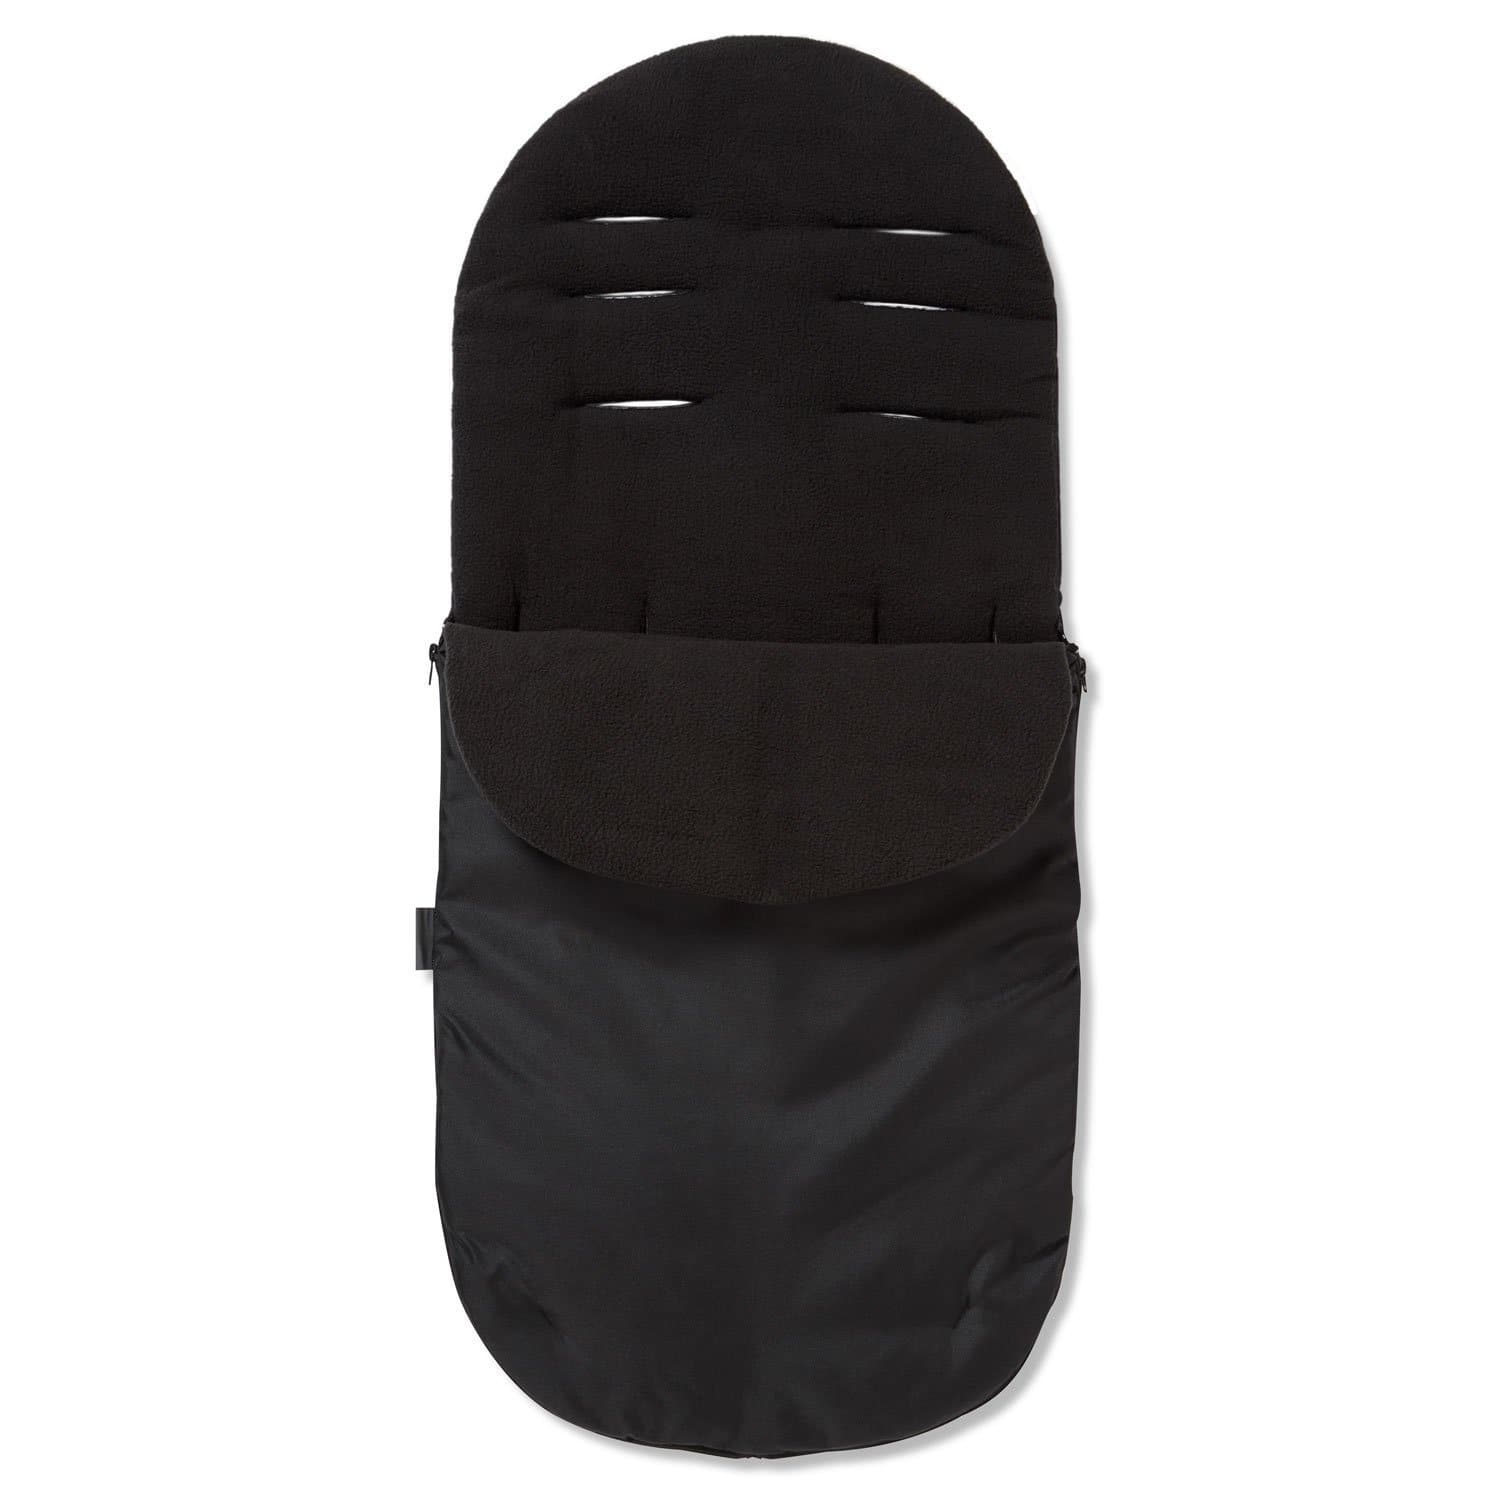 Footmuff / Cosy Toes Compatible with ABC Design - Black / Fits All Models | For Your Little One